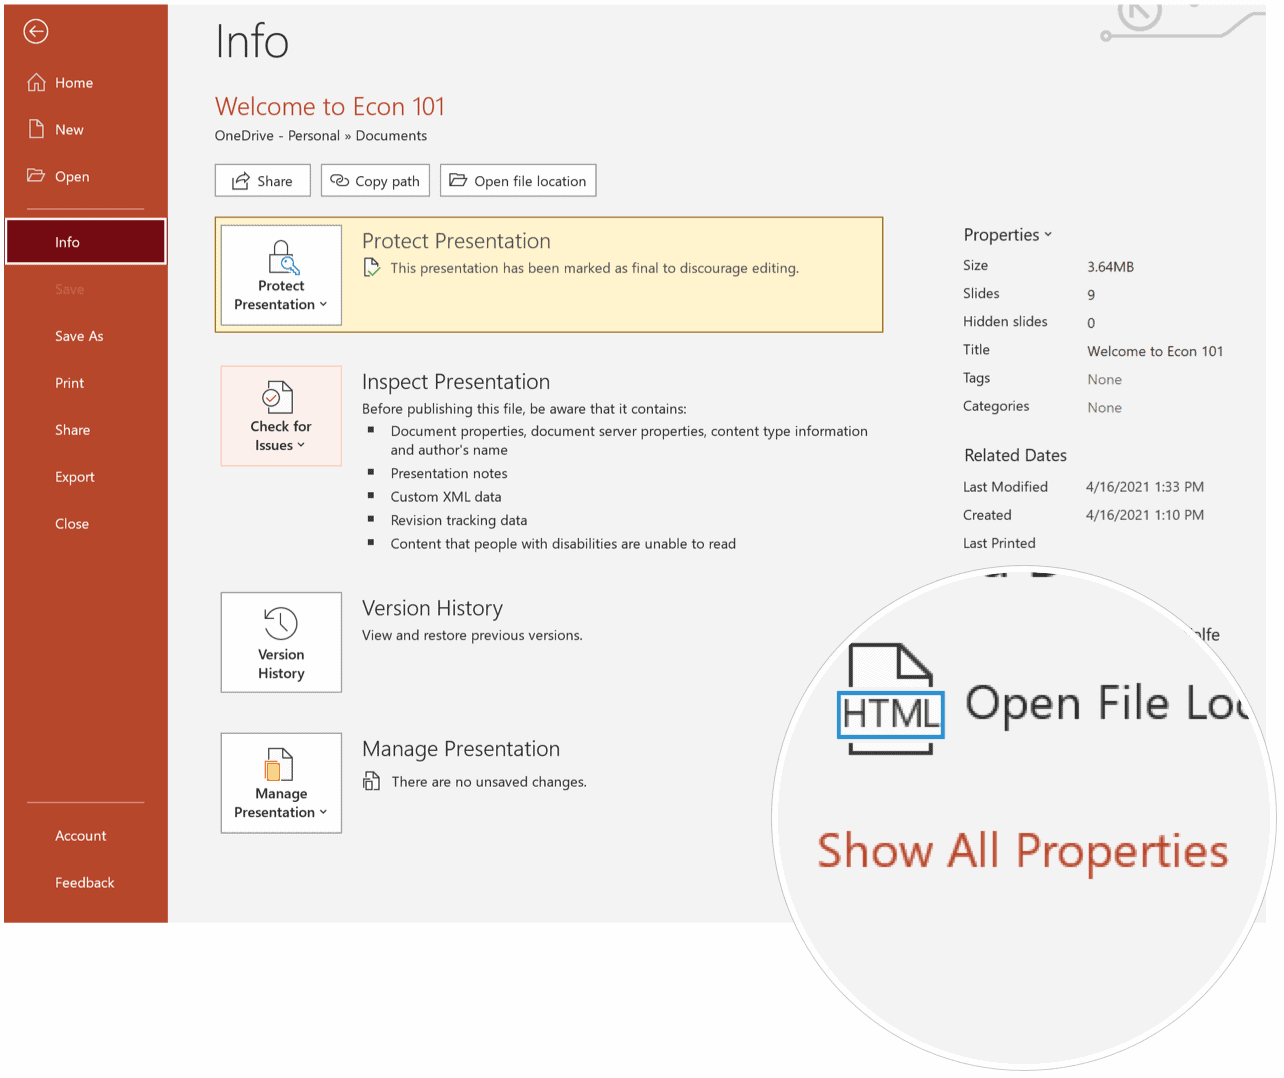 How to Check Word Count on Powerpoint?